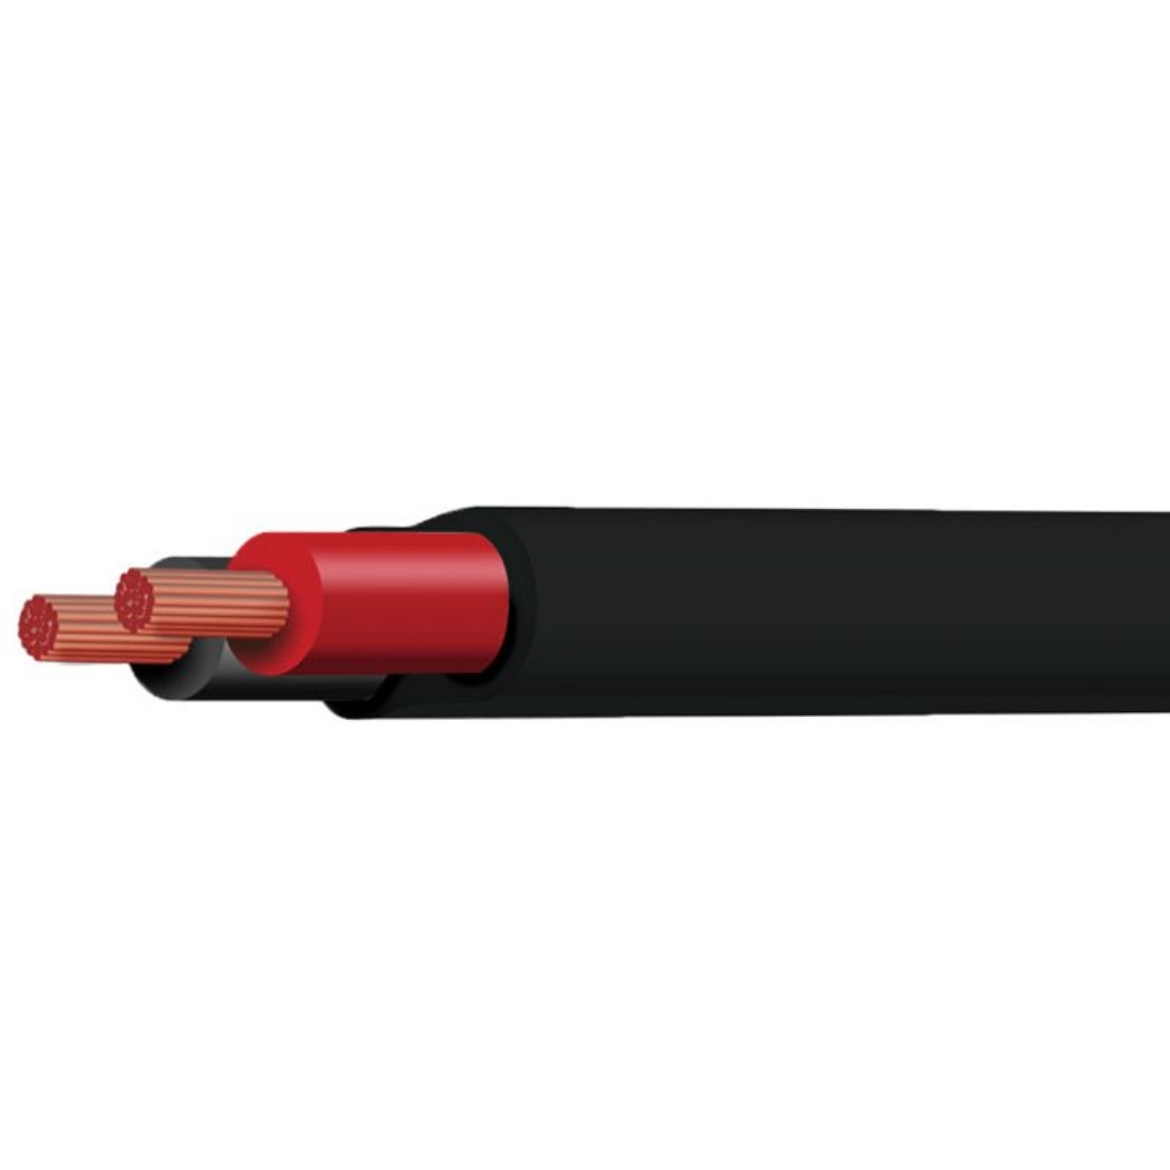 Picture of TYCAB 6MM TWIN CORE CABLE CUT 38A TWIN SHEATH BLACK/RED - PER METER